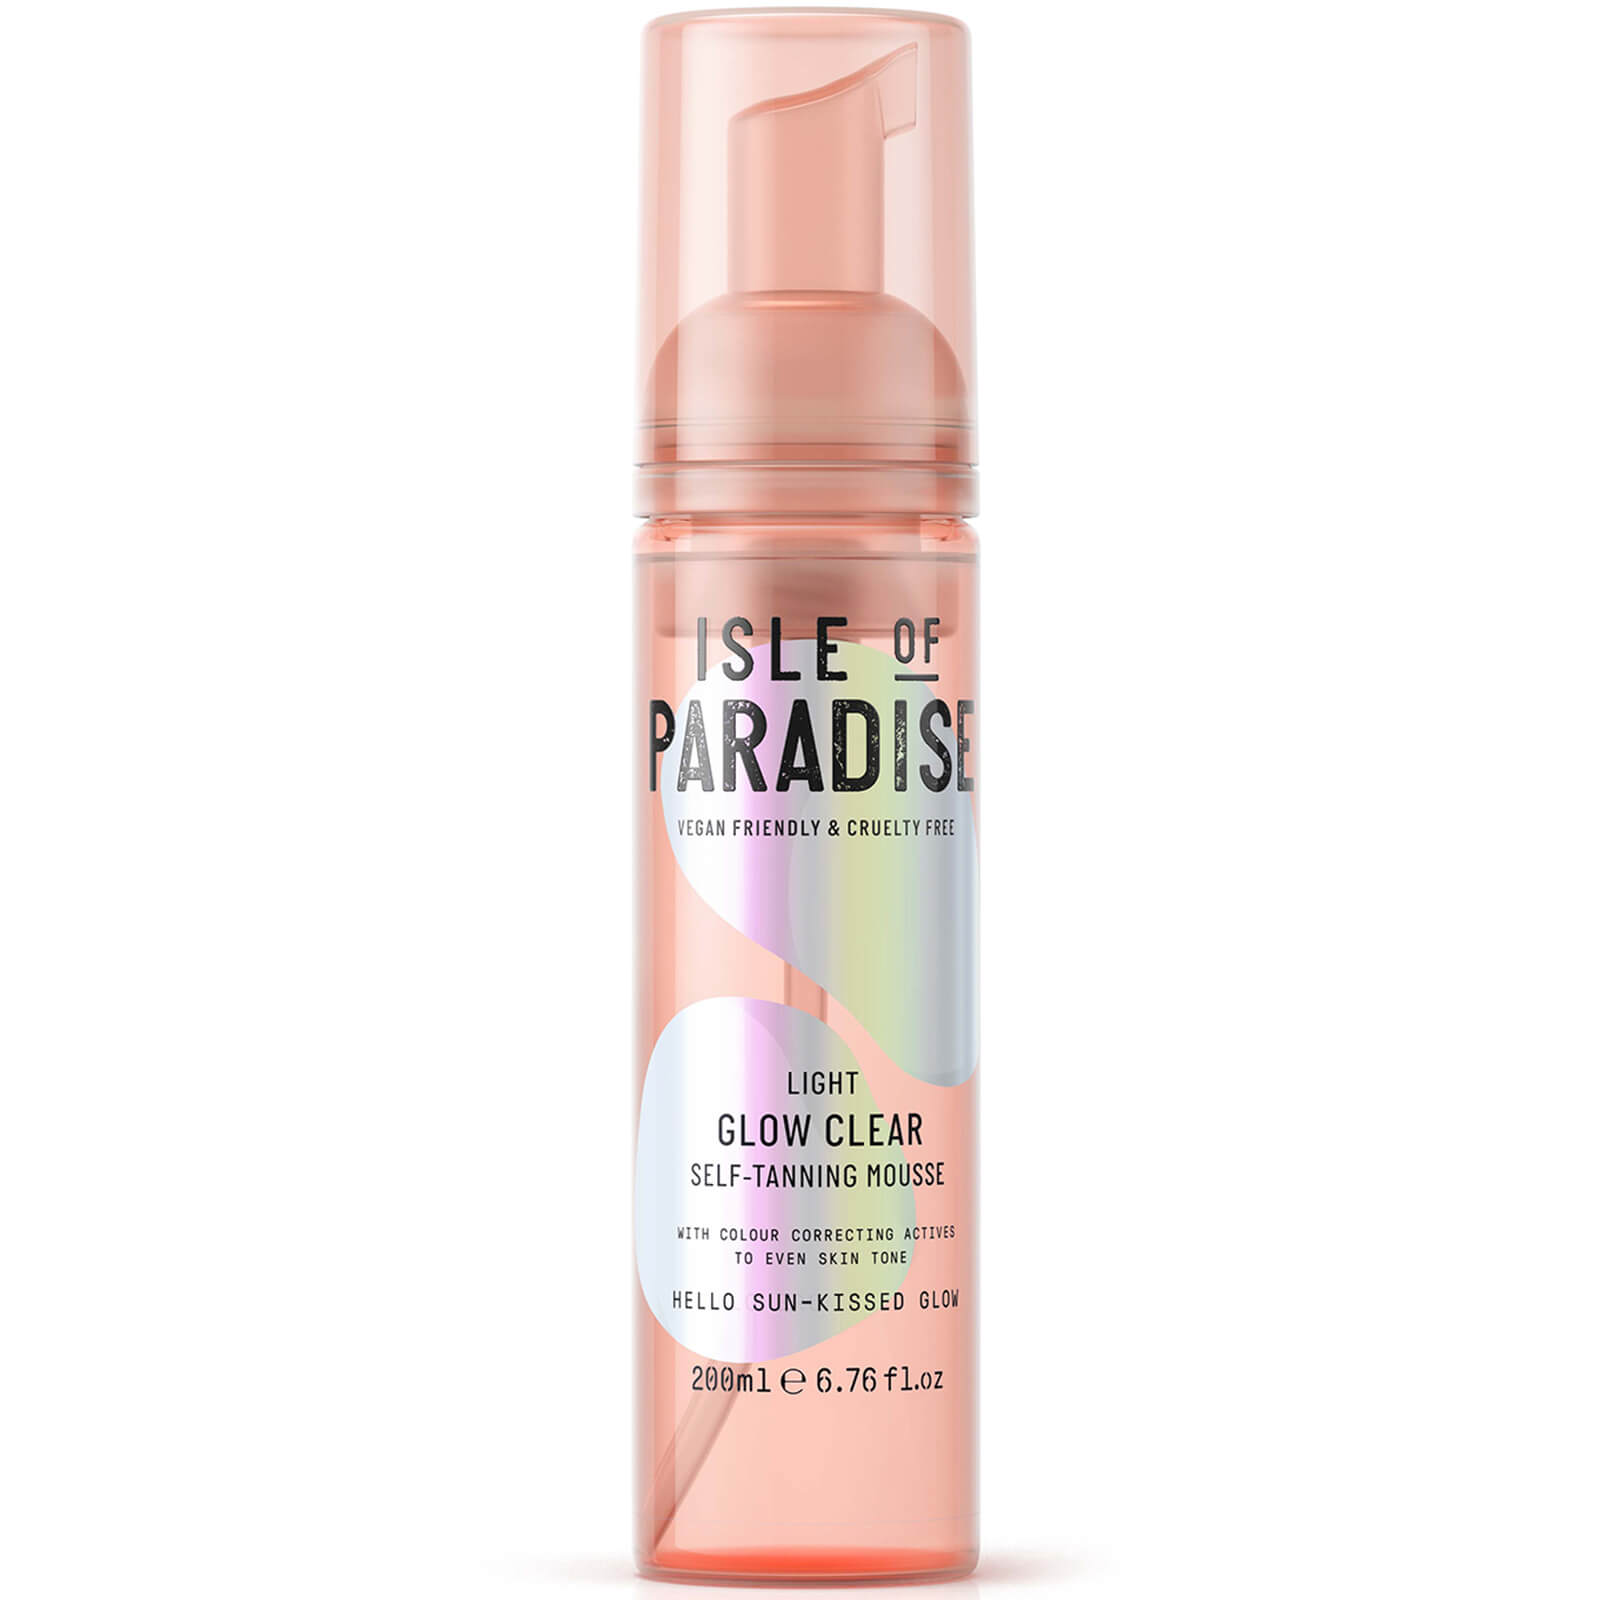 Image of Isle of Paradise Glow Clear Self-Tanning Mousse - Light 200ml